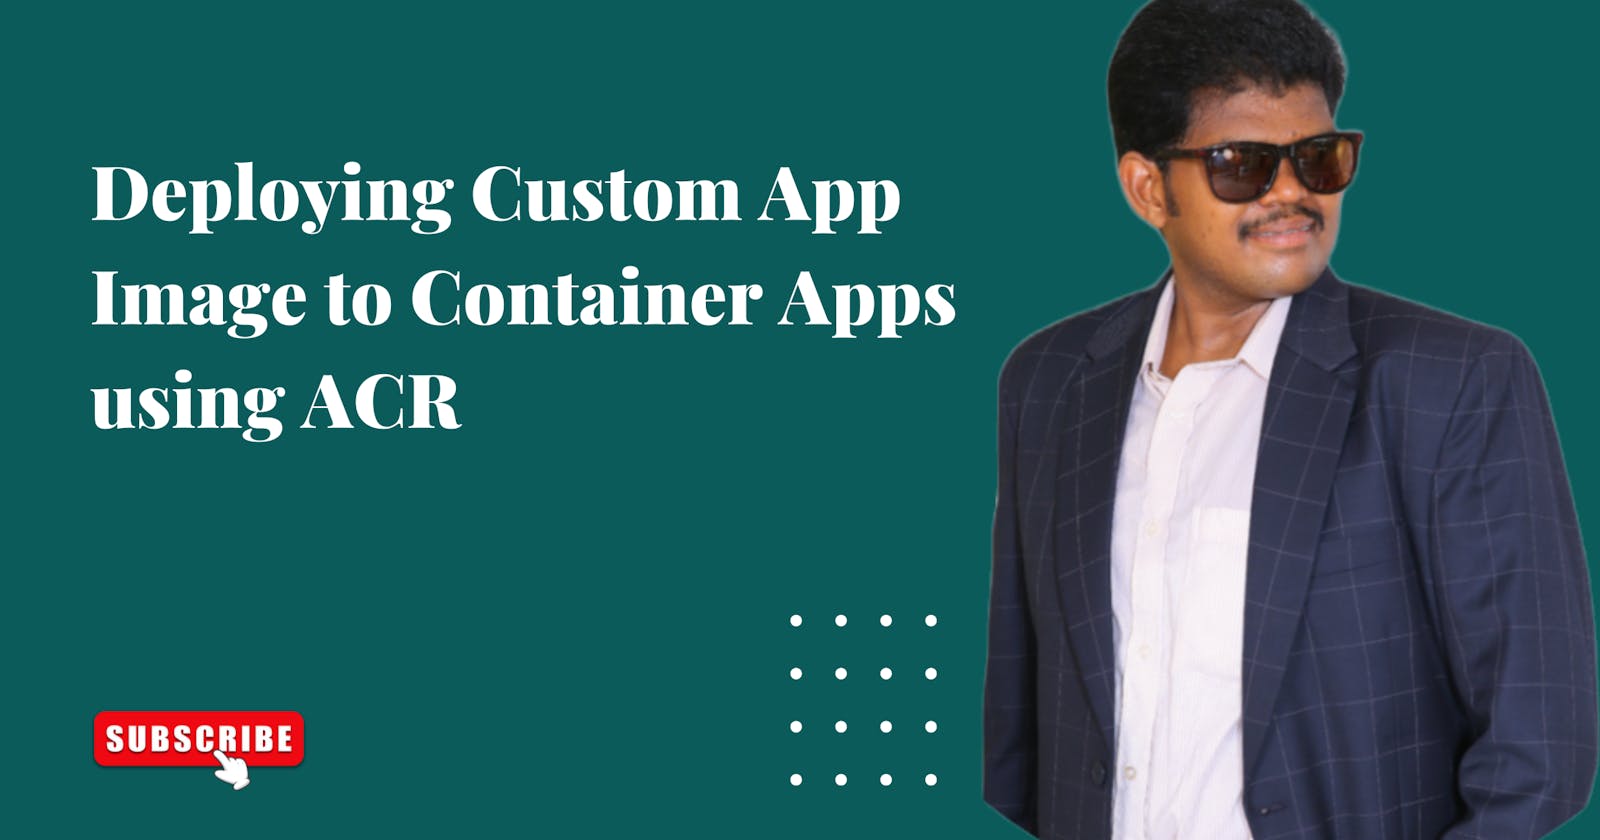 Deploying Custom App Image to Container Apps using Azure Container Registry